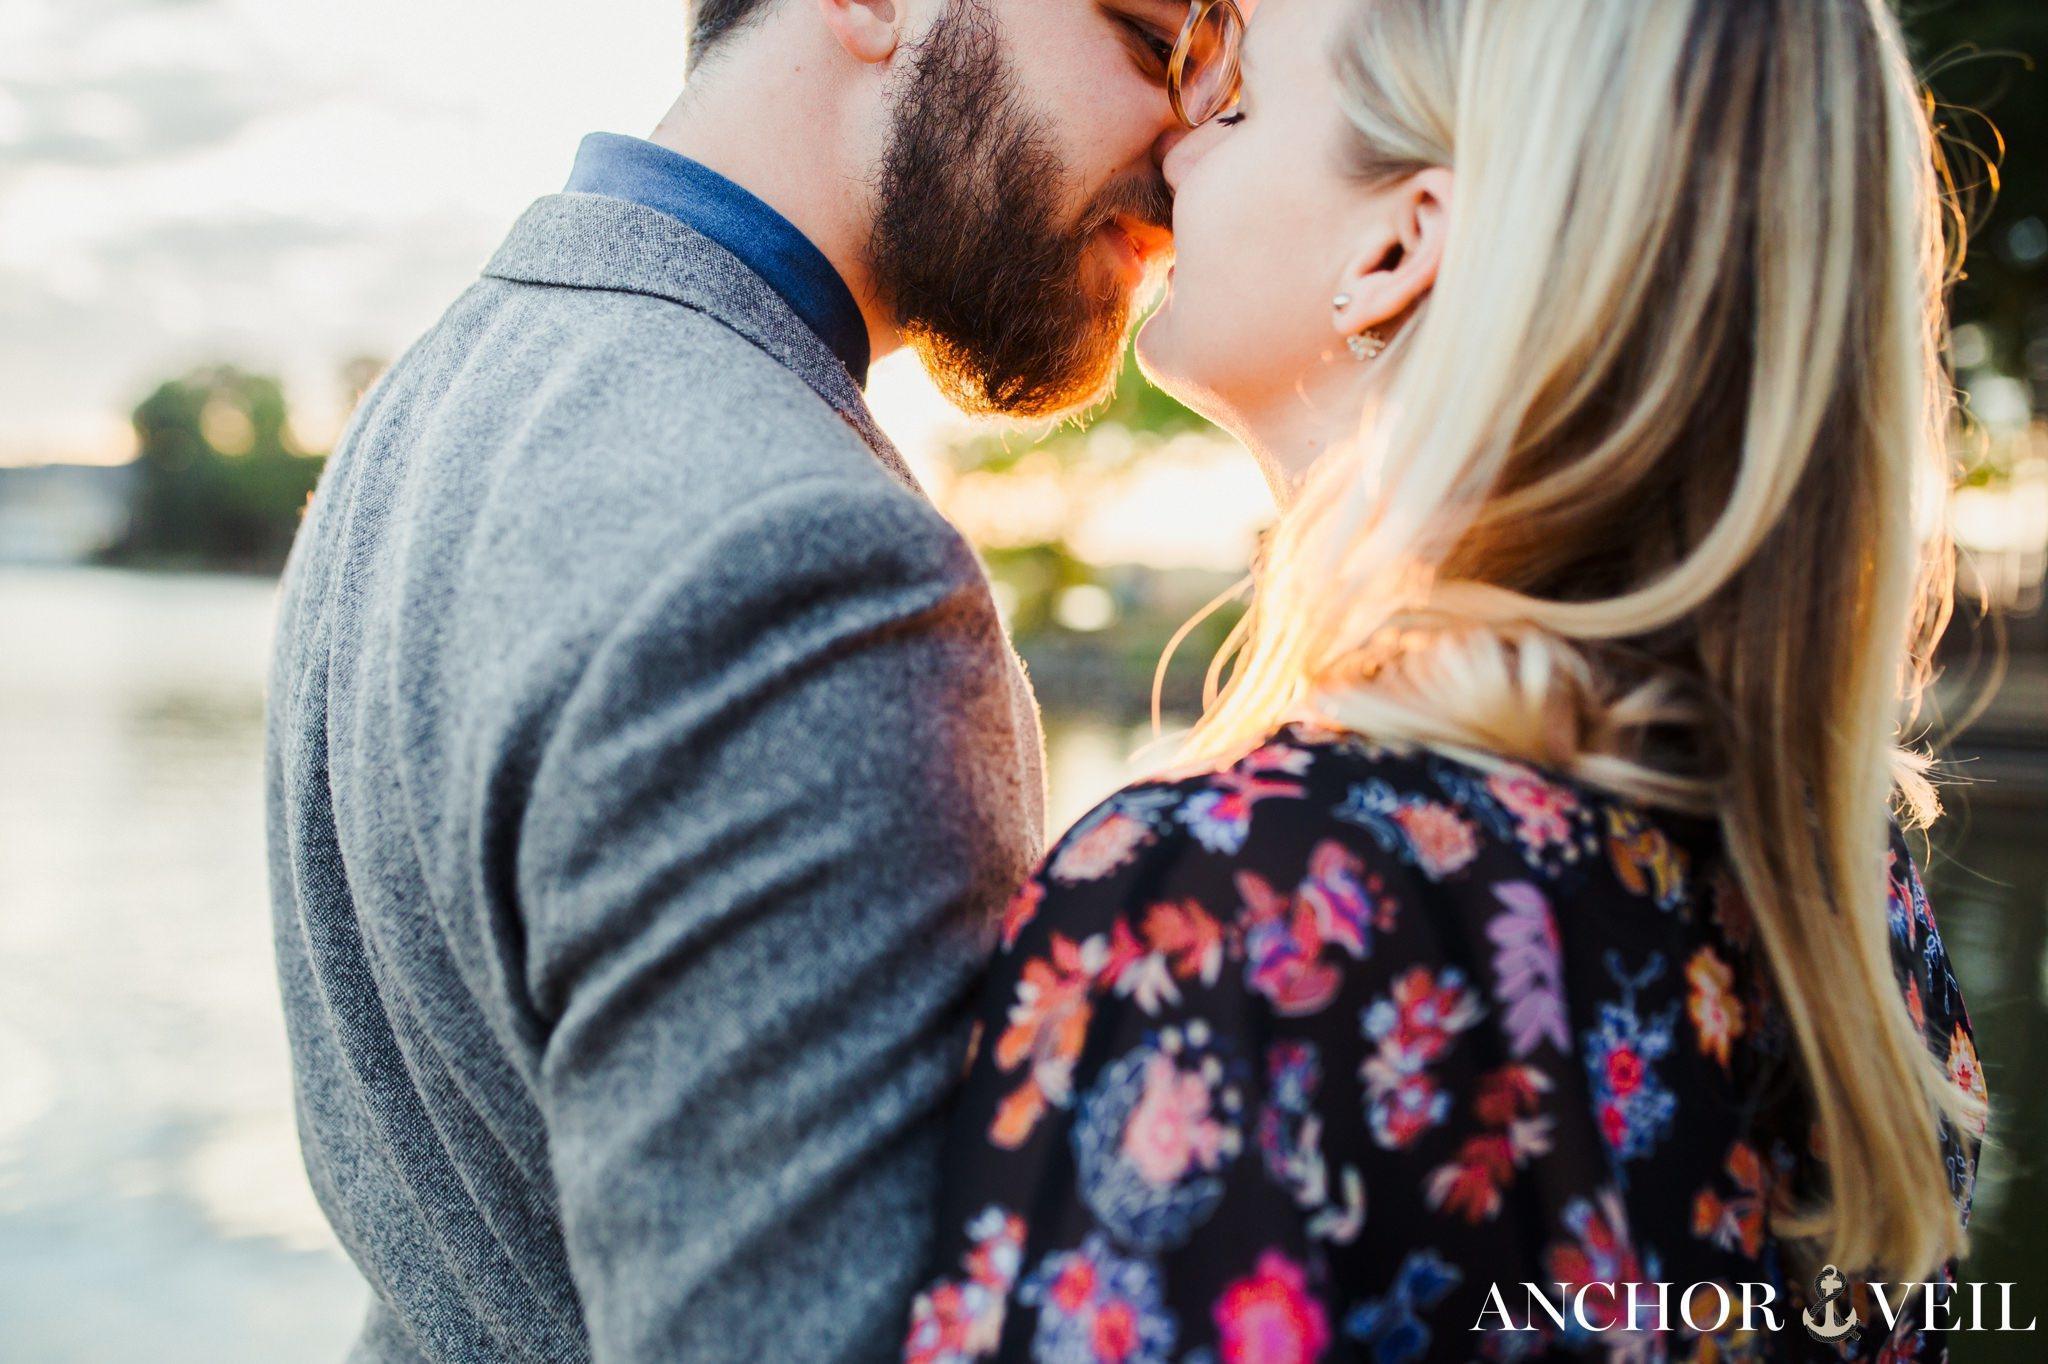 These lovers almost kissing in the light during their McDowell Nature Preserve Engagement Session